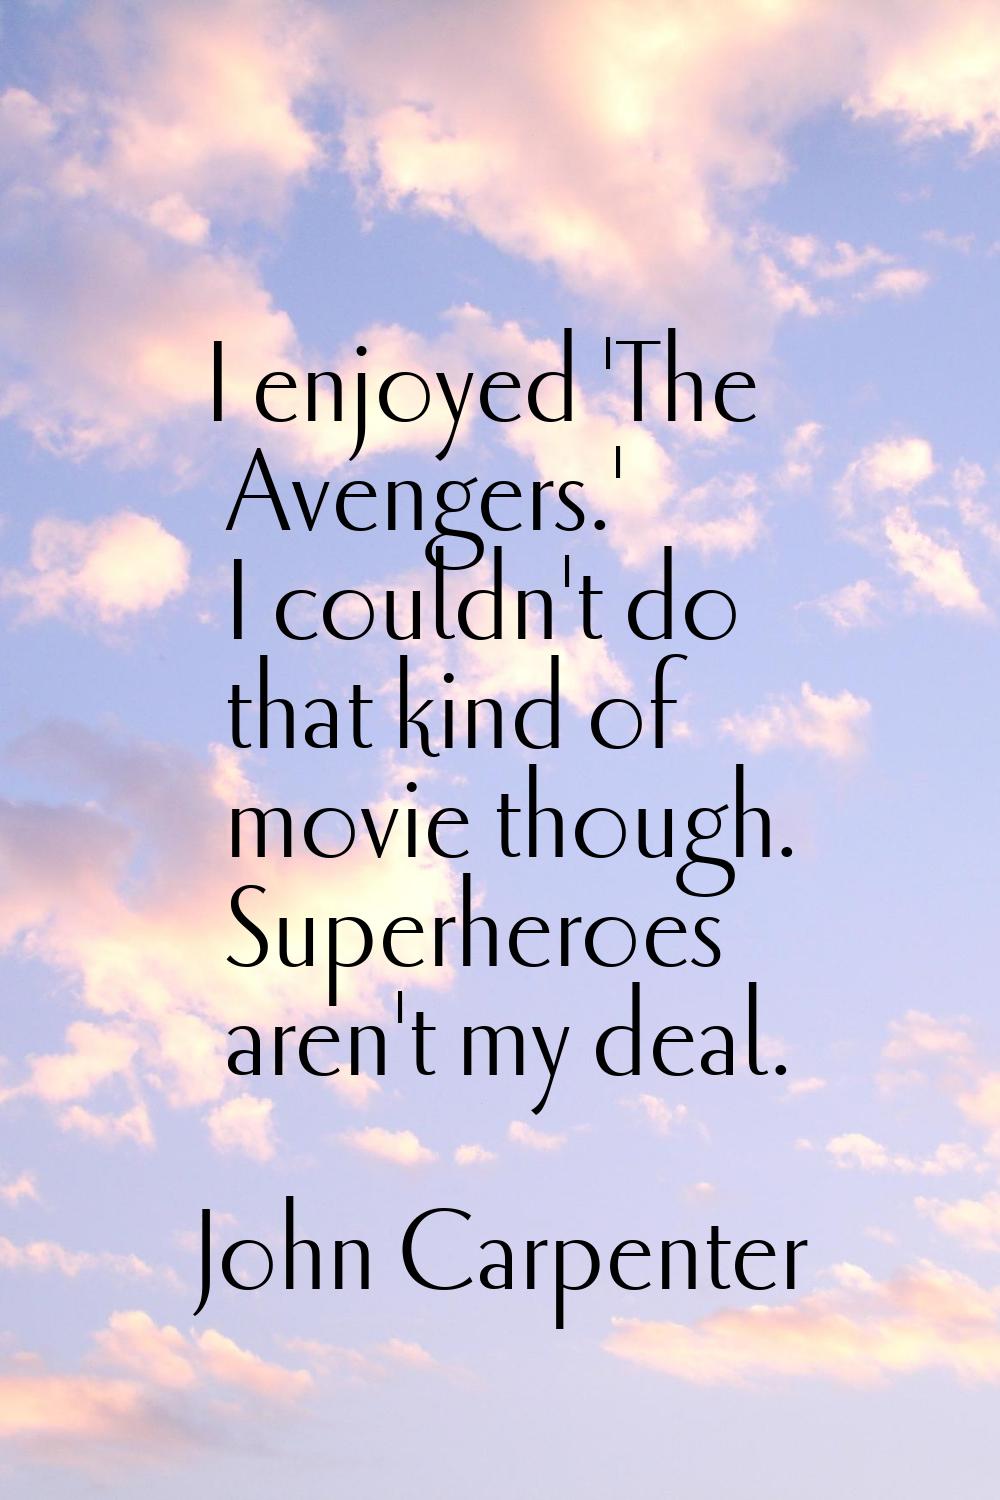 I enjoyed 'The Avengers.' I couldn't do that kind of movie though. Superheroes aren't my deal.